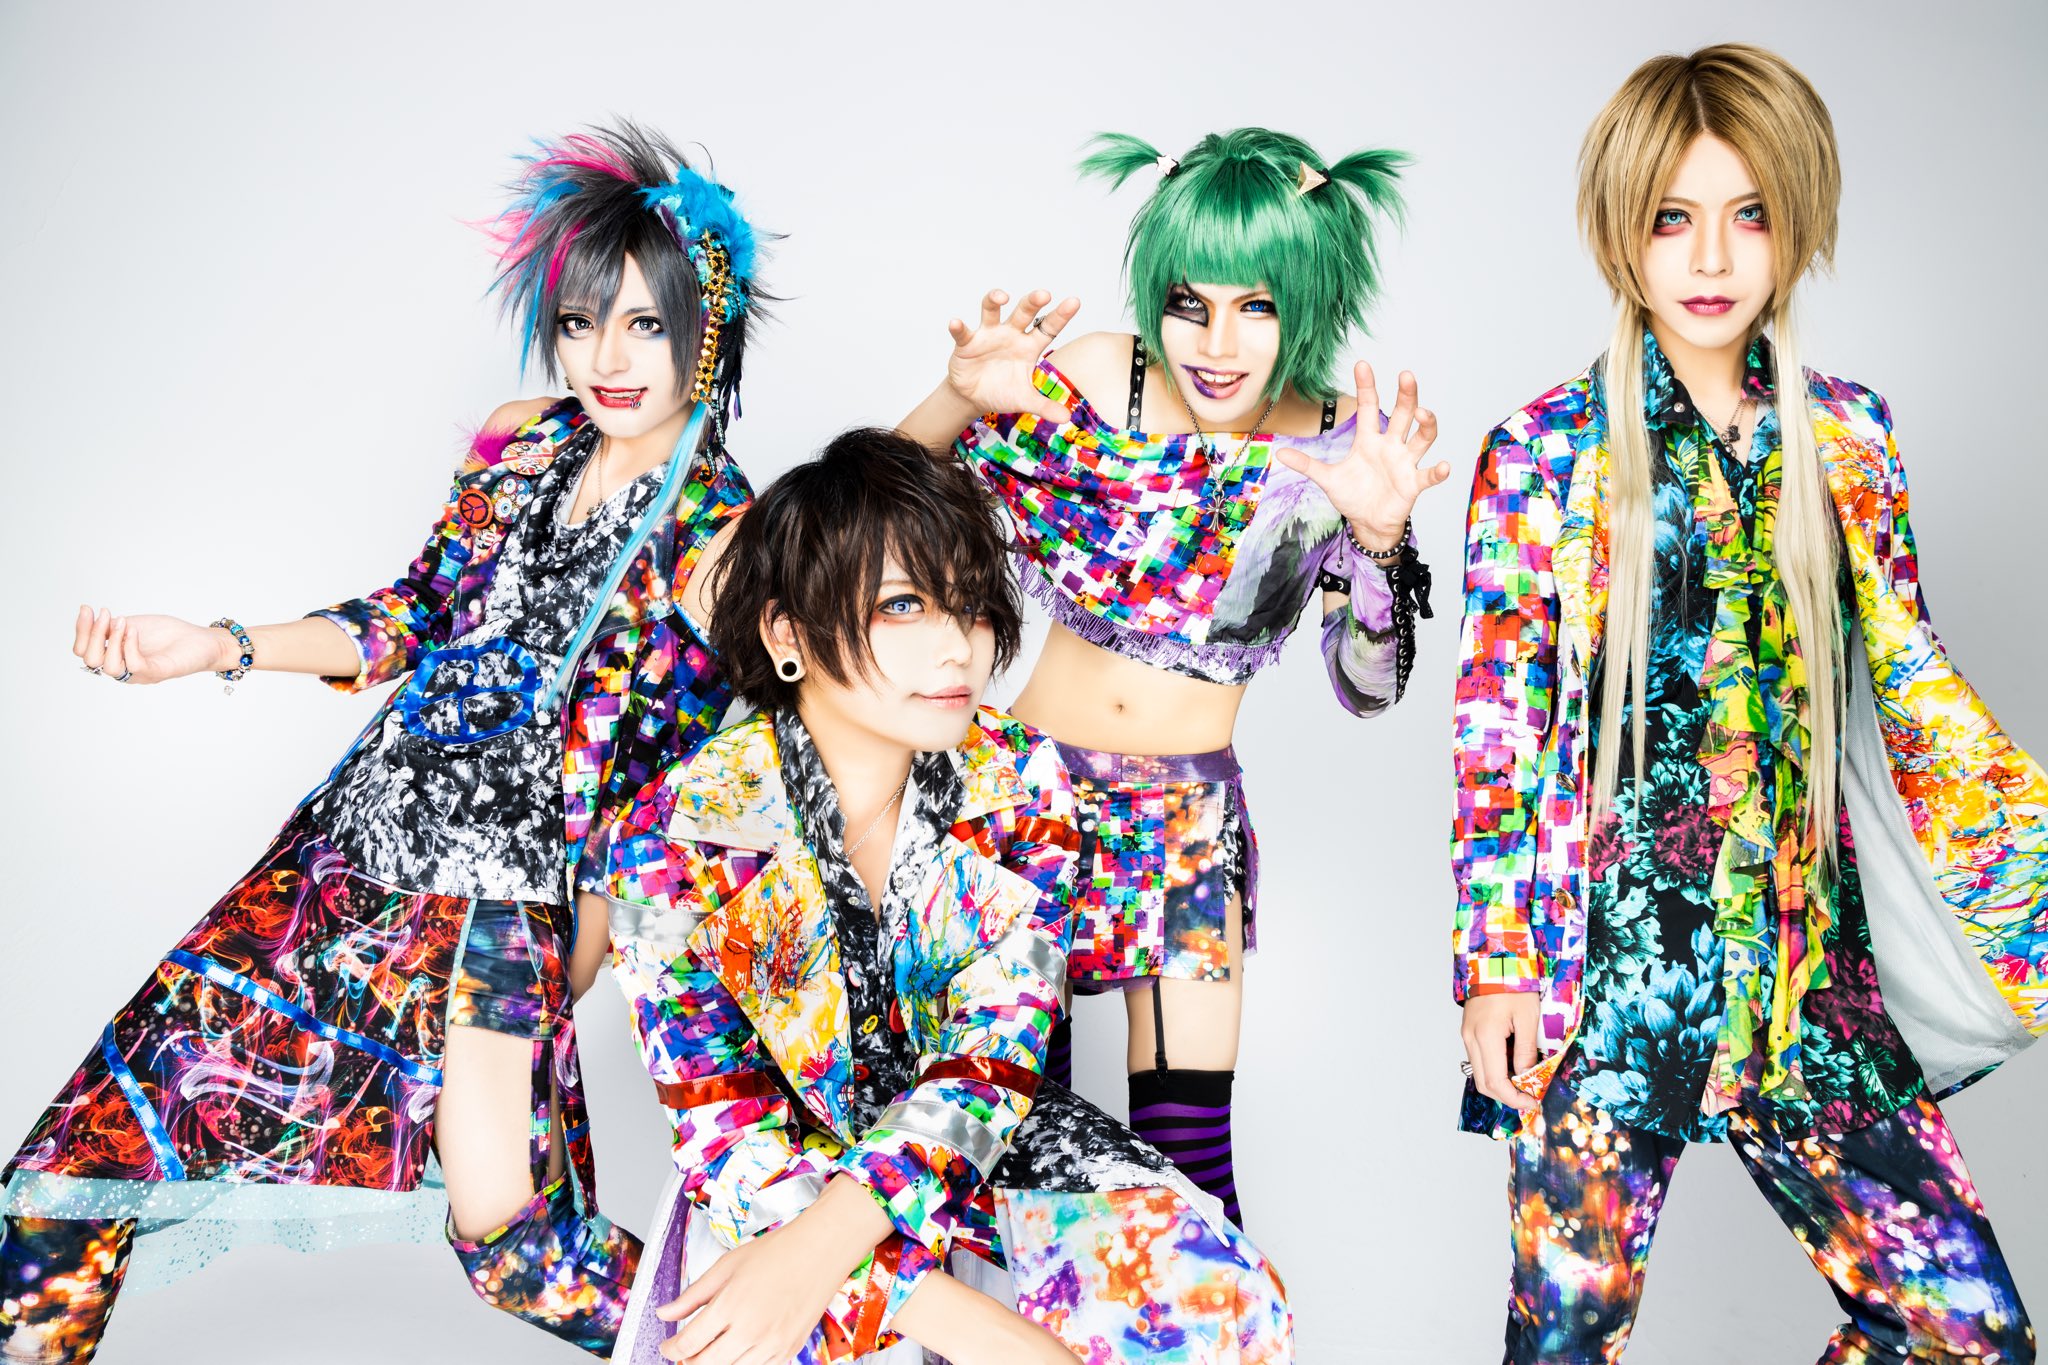 Asty – New MV “Tears” and new looks